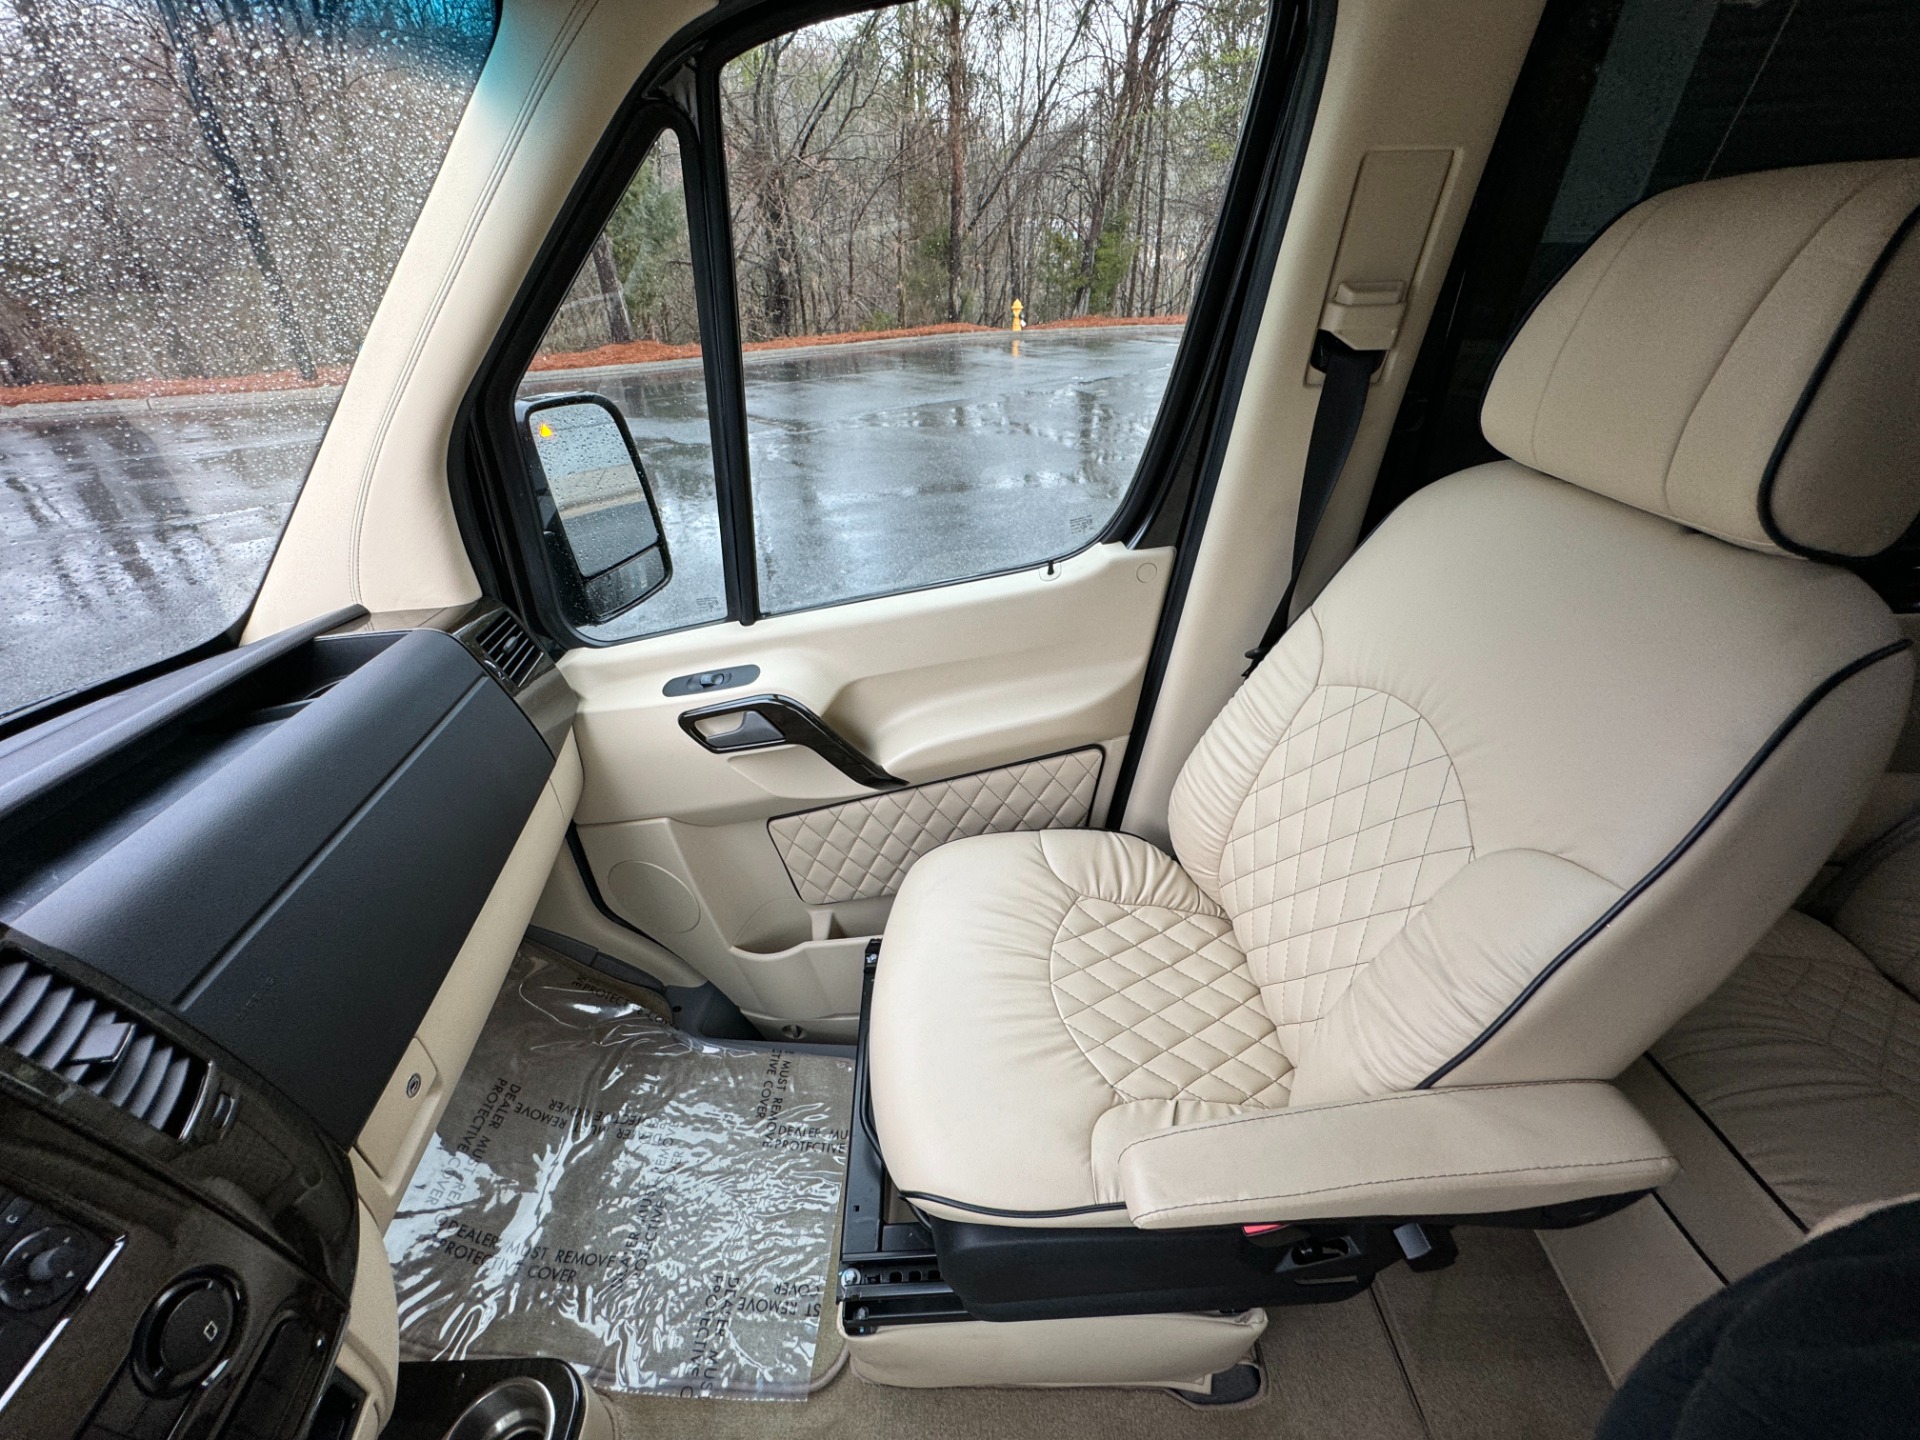 Used 2017 Mercedes-Benz Sprinter Cargo Van MIDWEST JET VAN CONVERSION for sale $120,000 at Formula Imports in Charlotte NC 28227 35